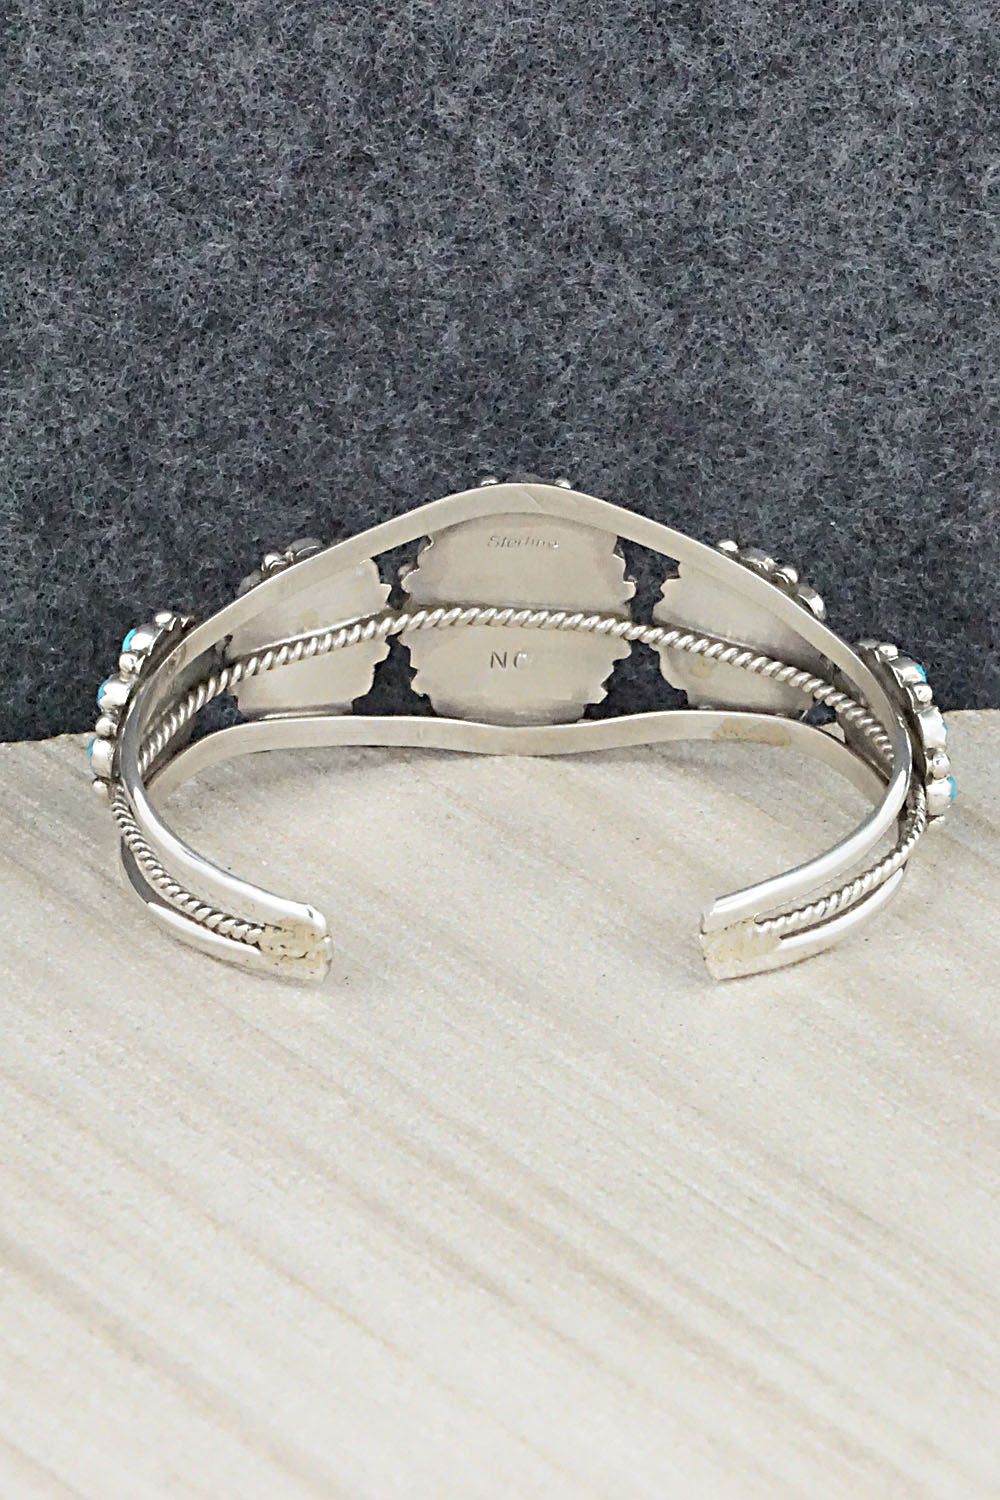 Turquoise & Sterling Silver Bracelet - Nathaniel Curley